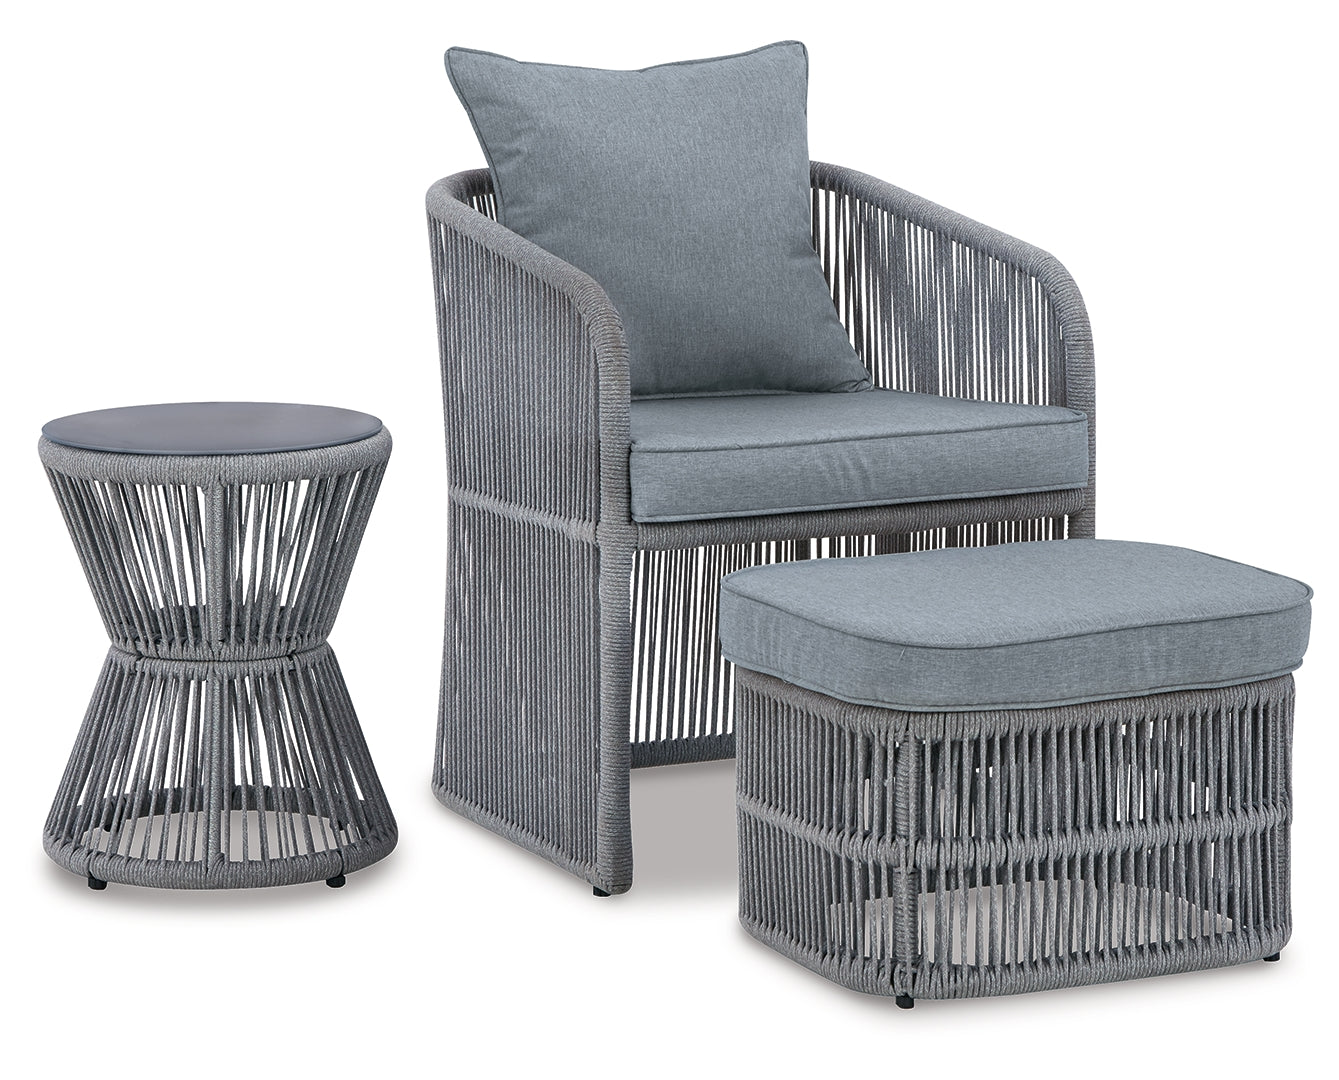 Coast Island Outdoor Chair with Ottoman and Side Table